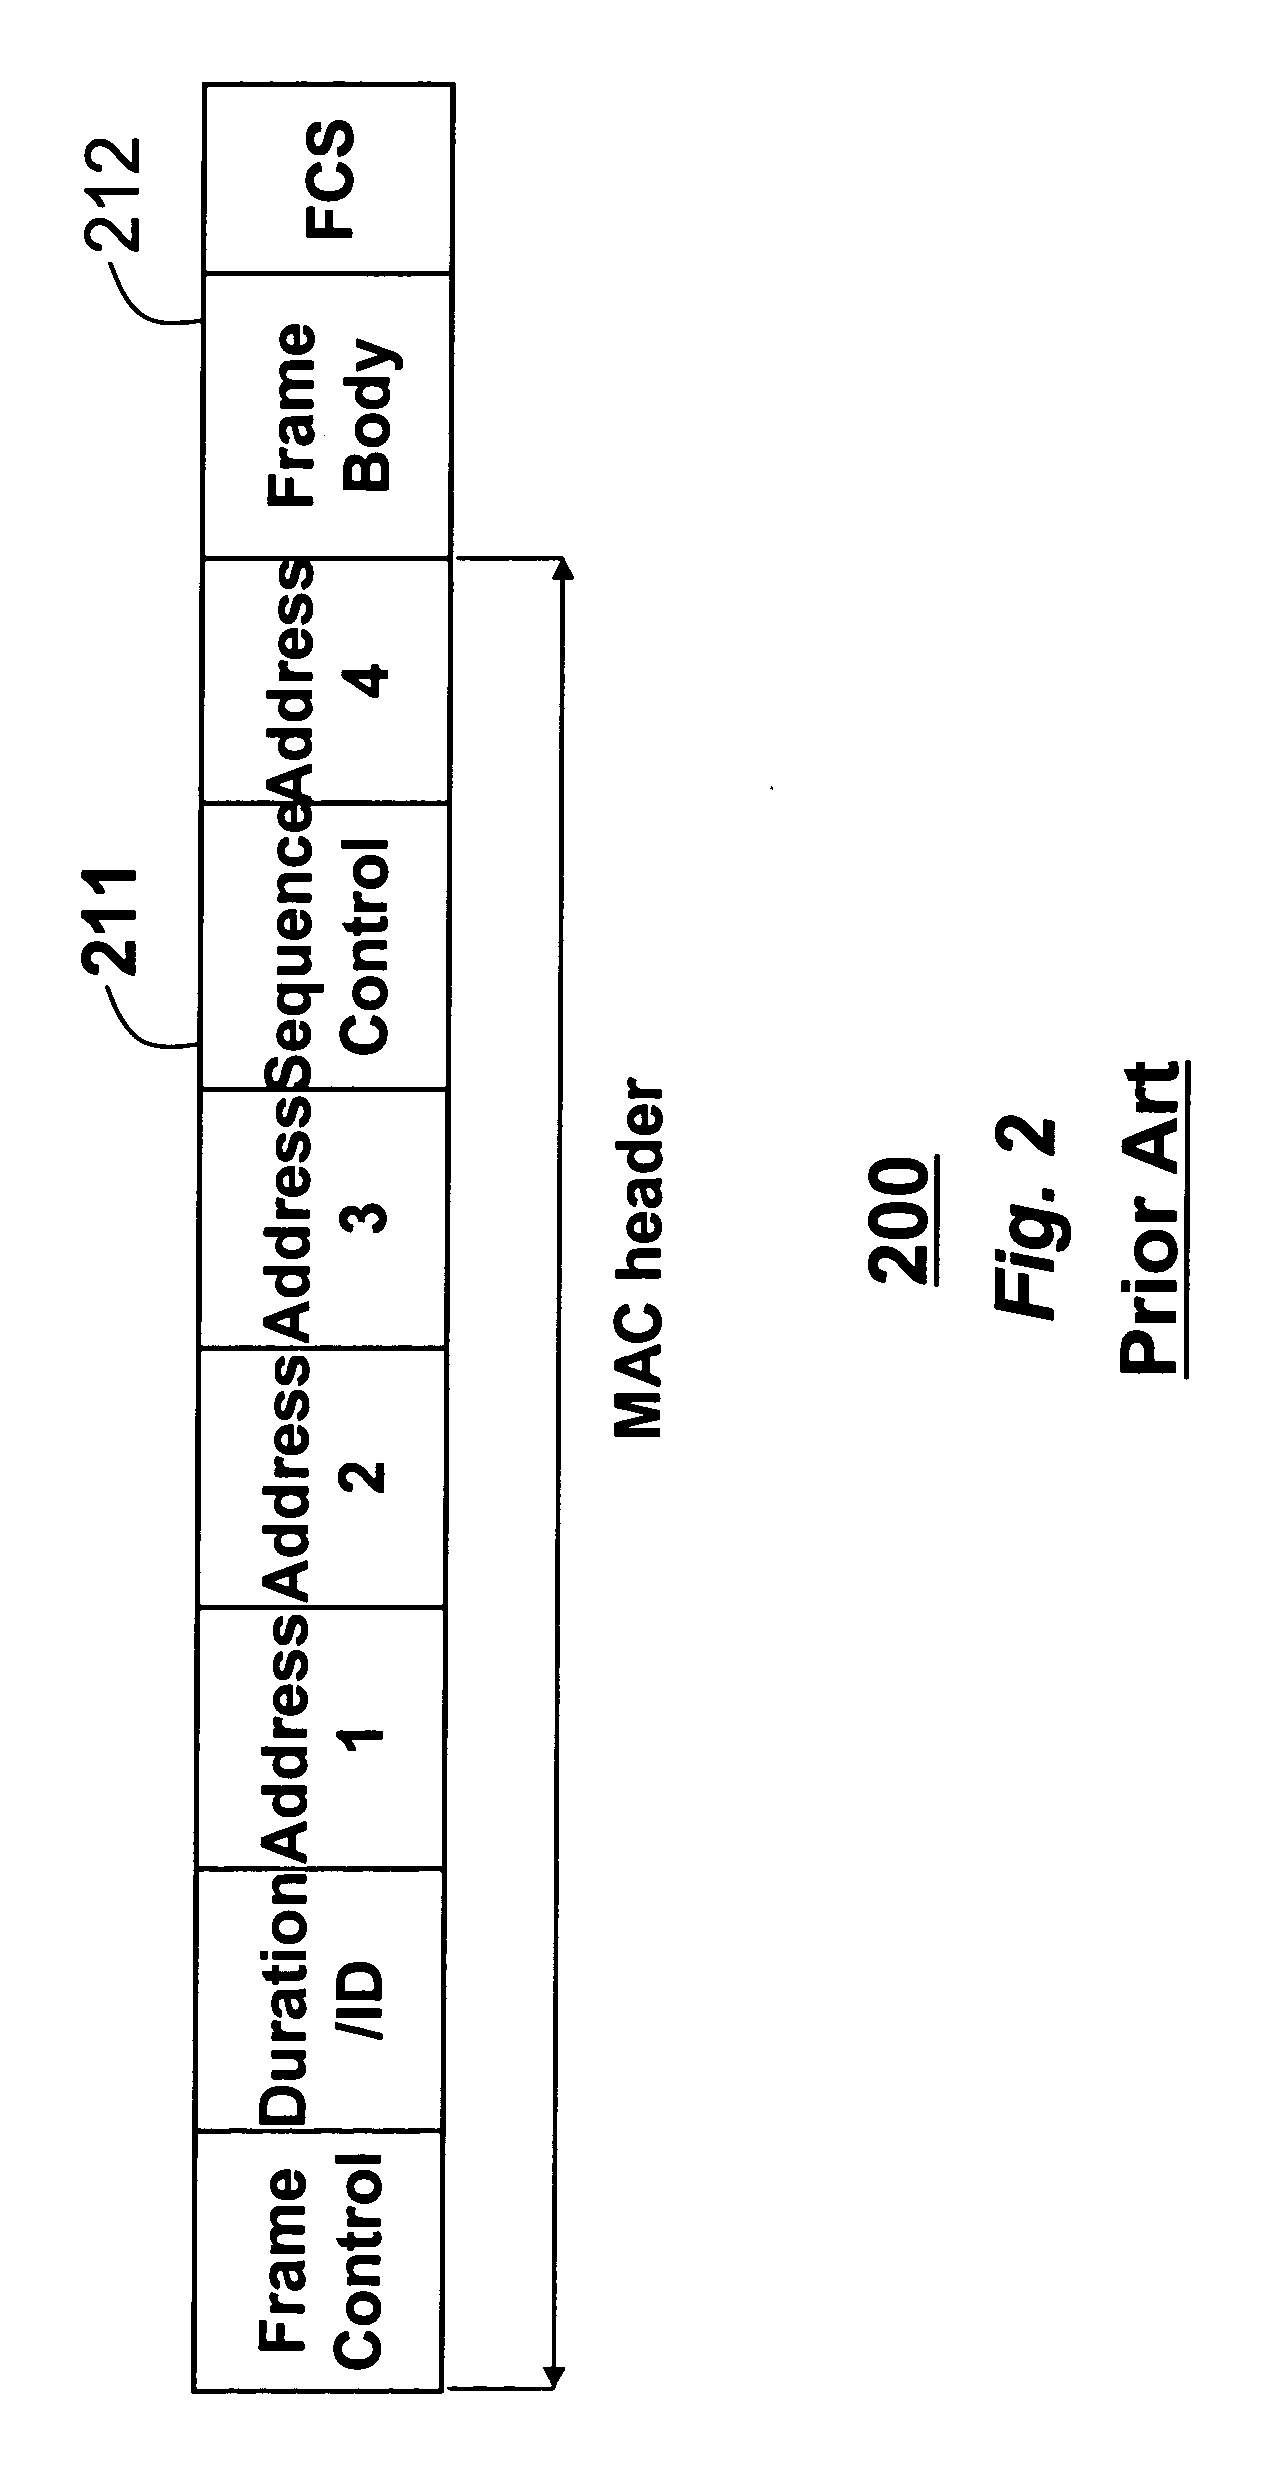 Frame aggregation in wireless communications networks